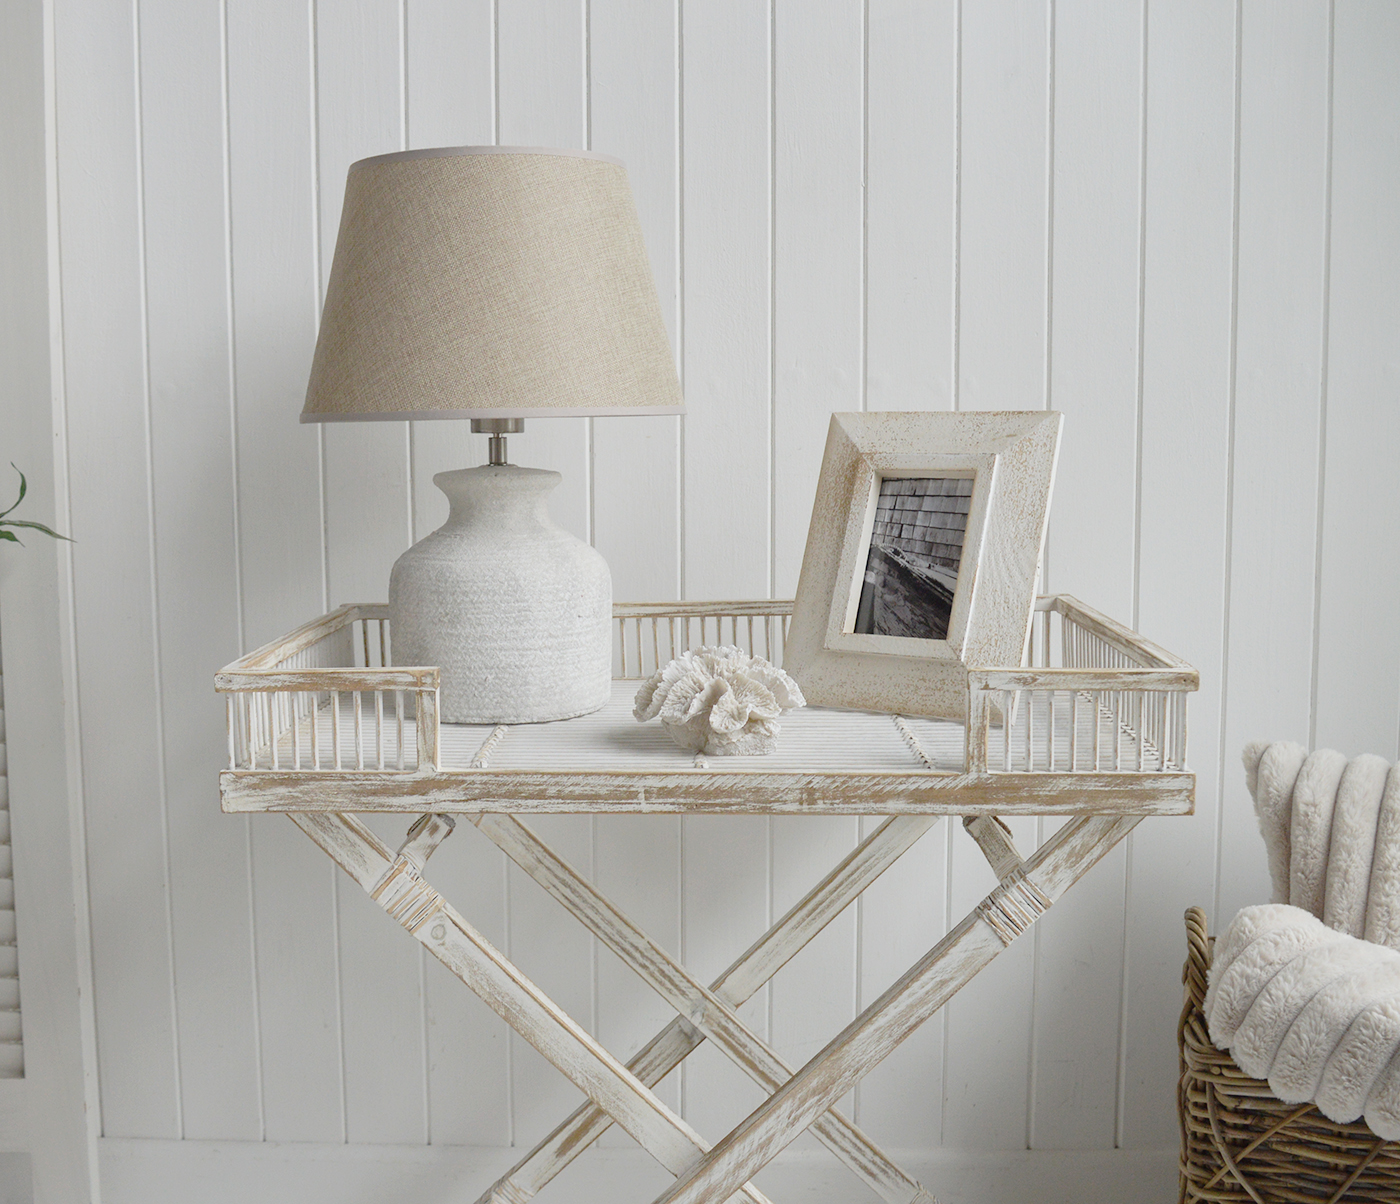 The Provincetown Table, a White wash beach house tray table, and ideal piece of furniture for coastal homes and interiors - shown here with neutral home decor accessories and a lamp